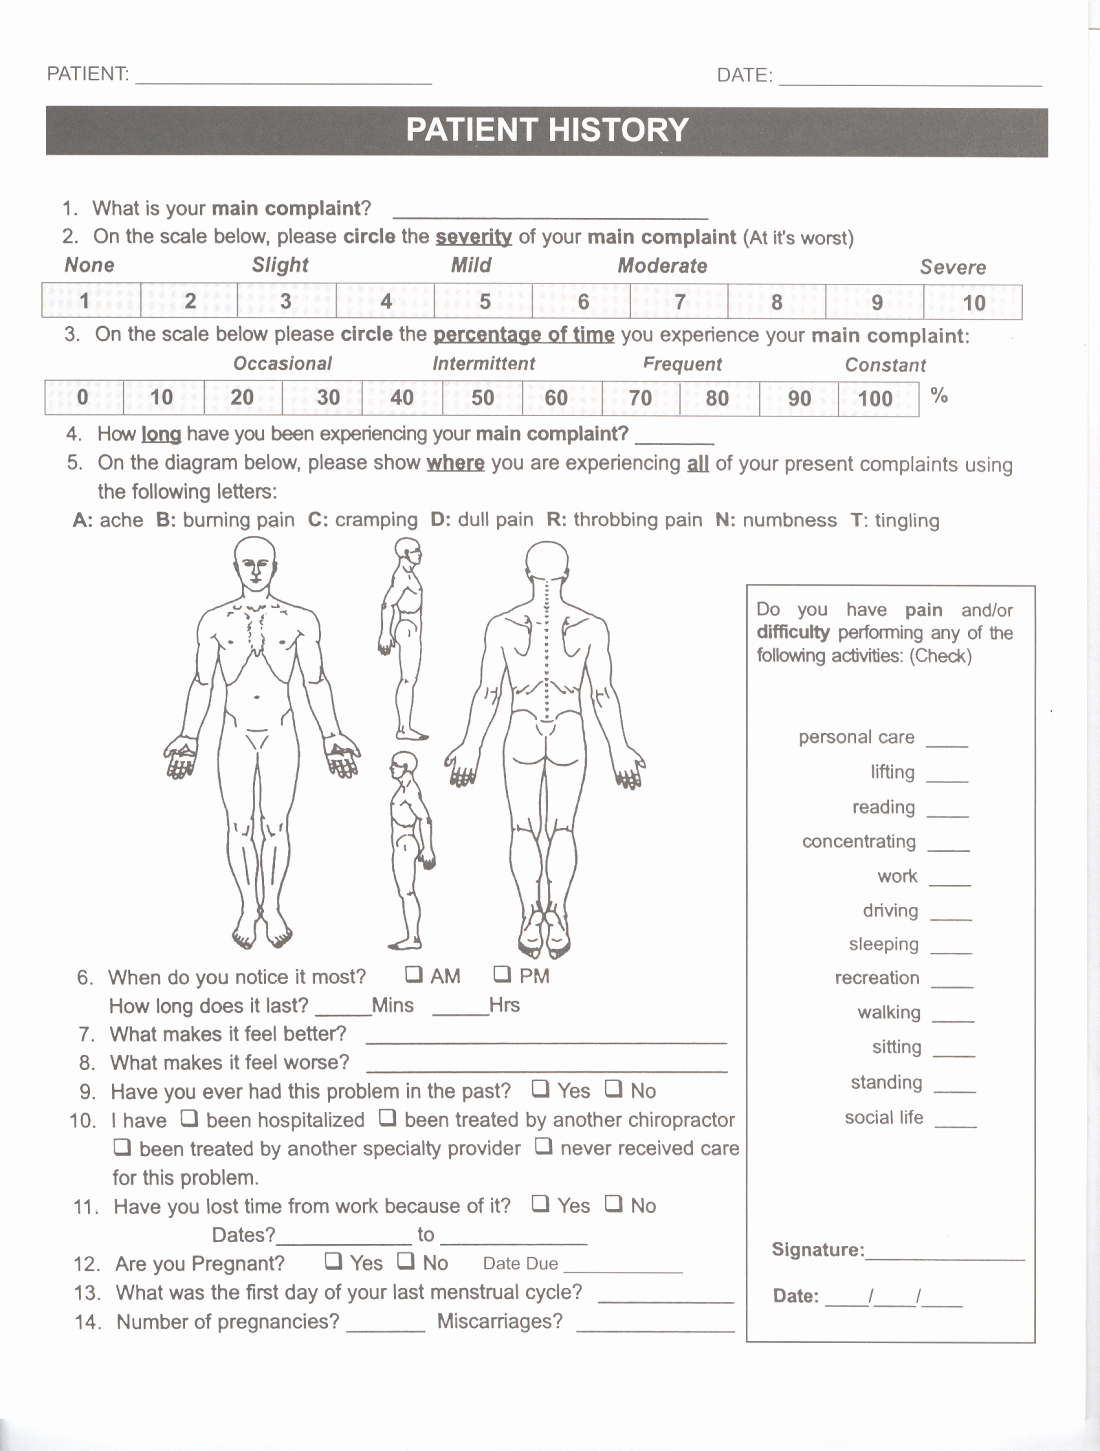 Physical therapy Intake form Template Elegant Medical form Intake form